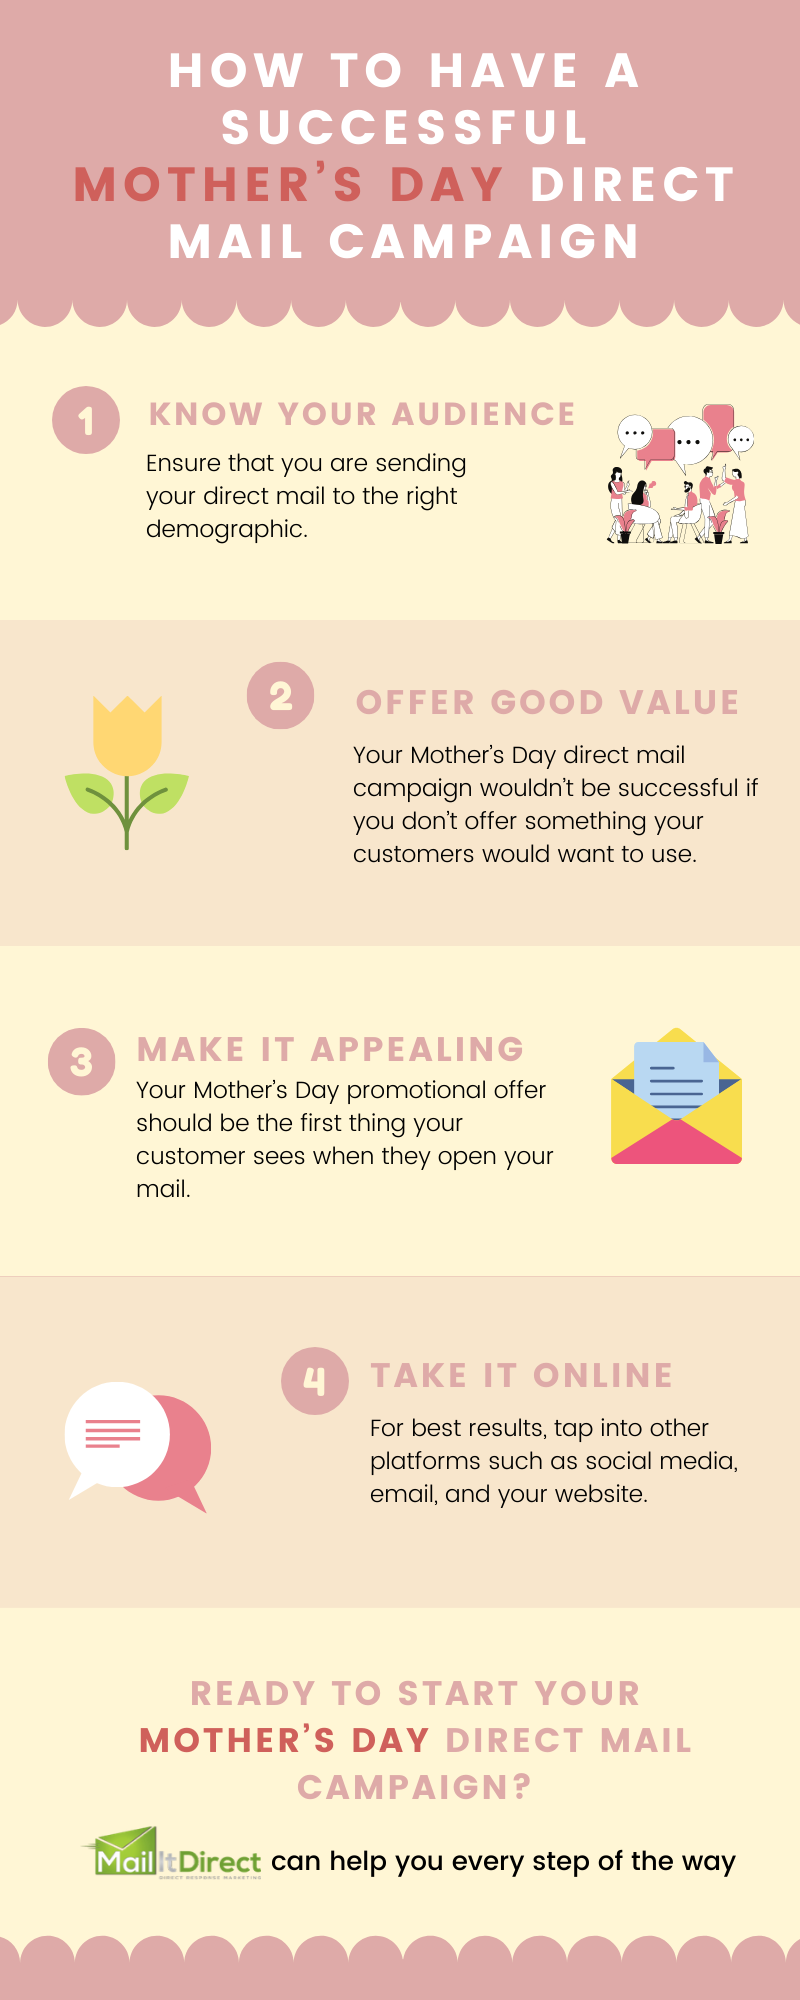 How to have a successful Mother’s Day direct mail campaign